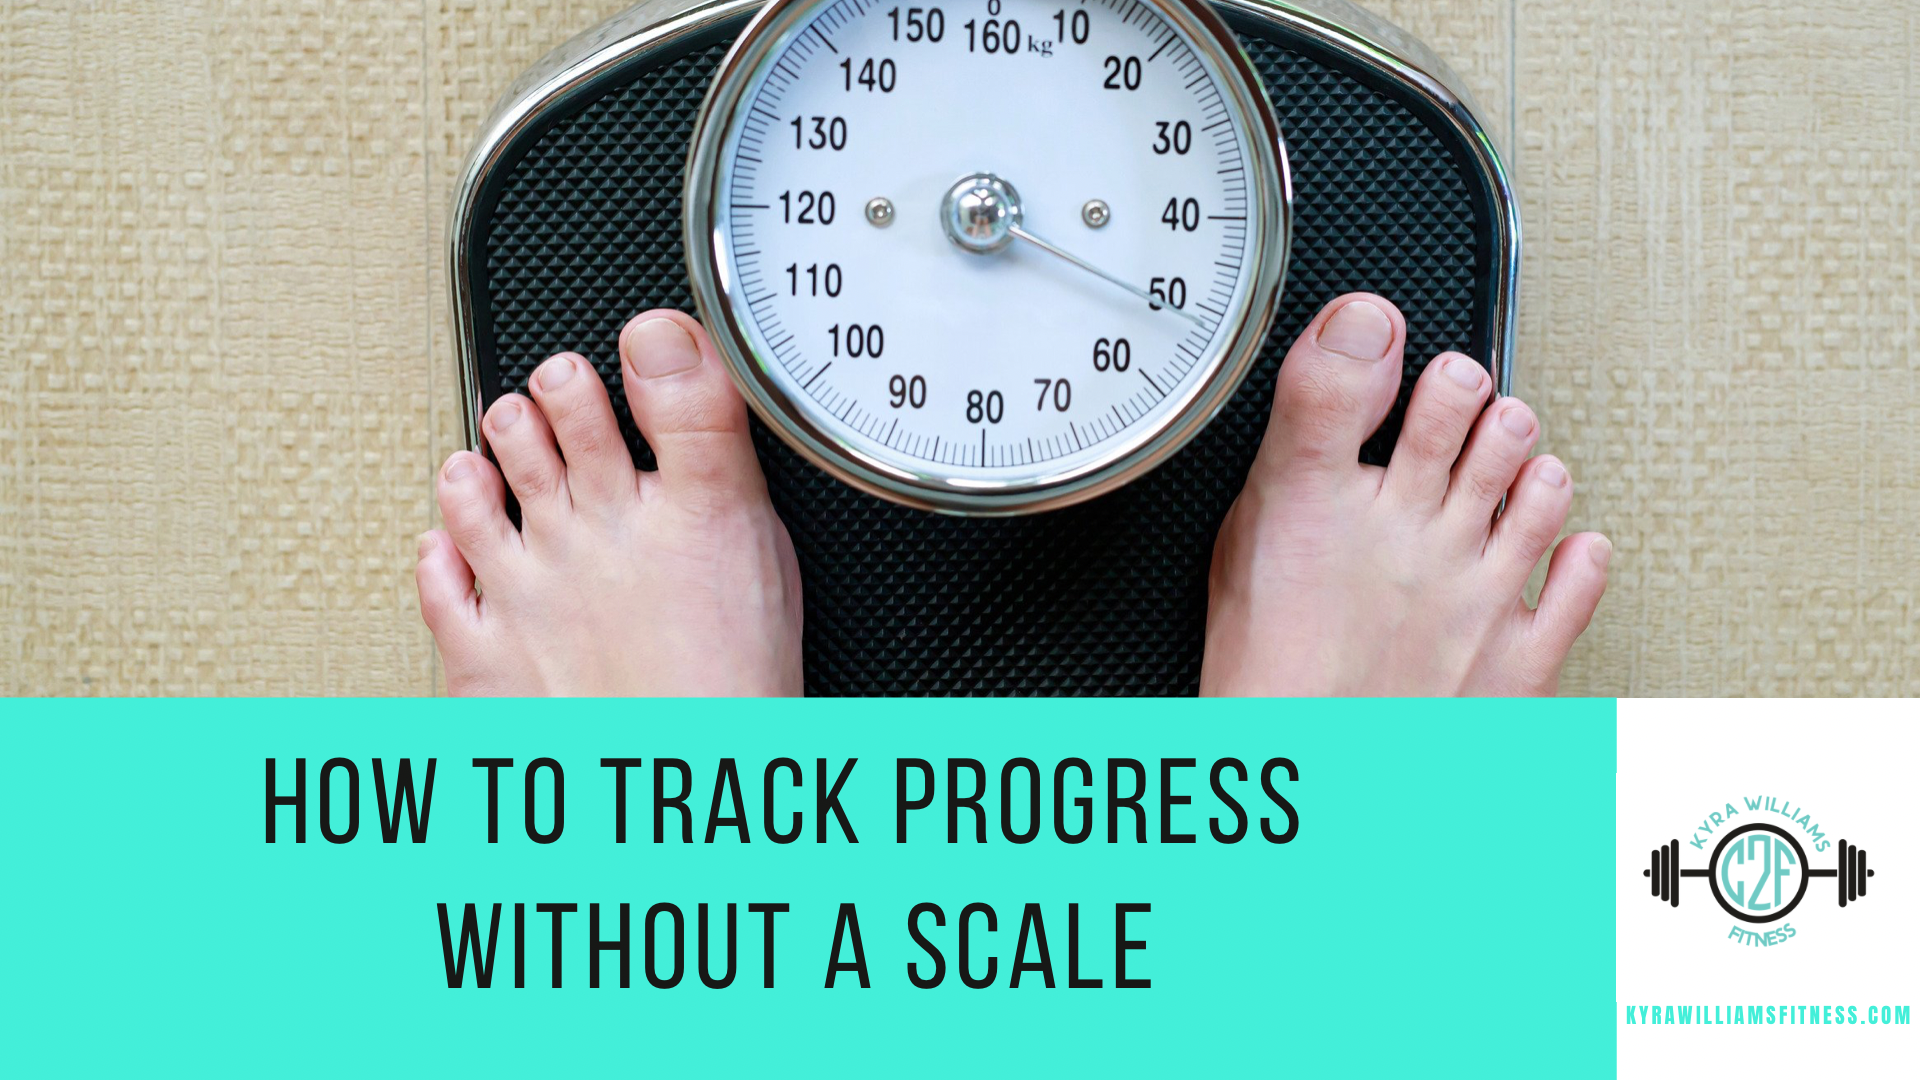 How to Track Progress Without a Scale